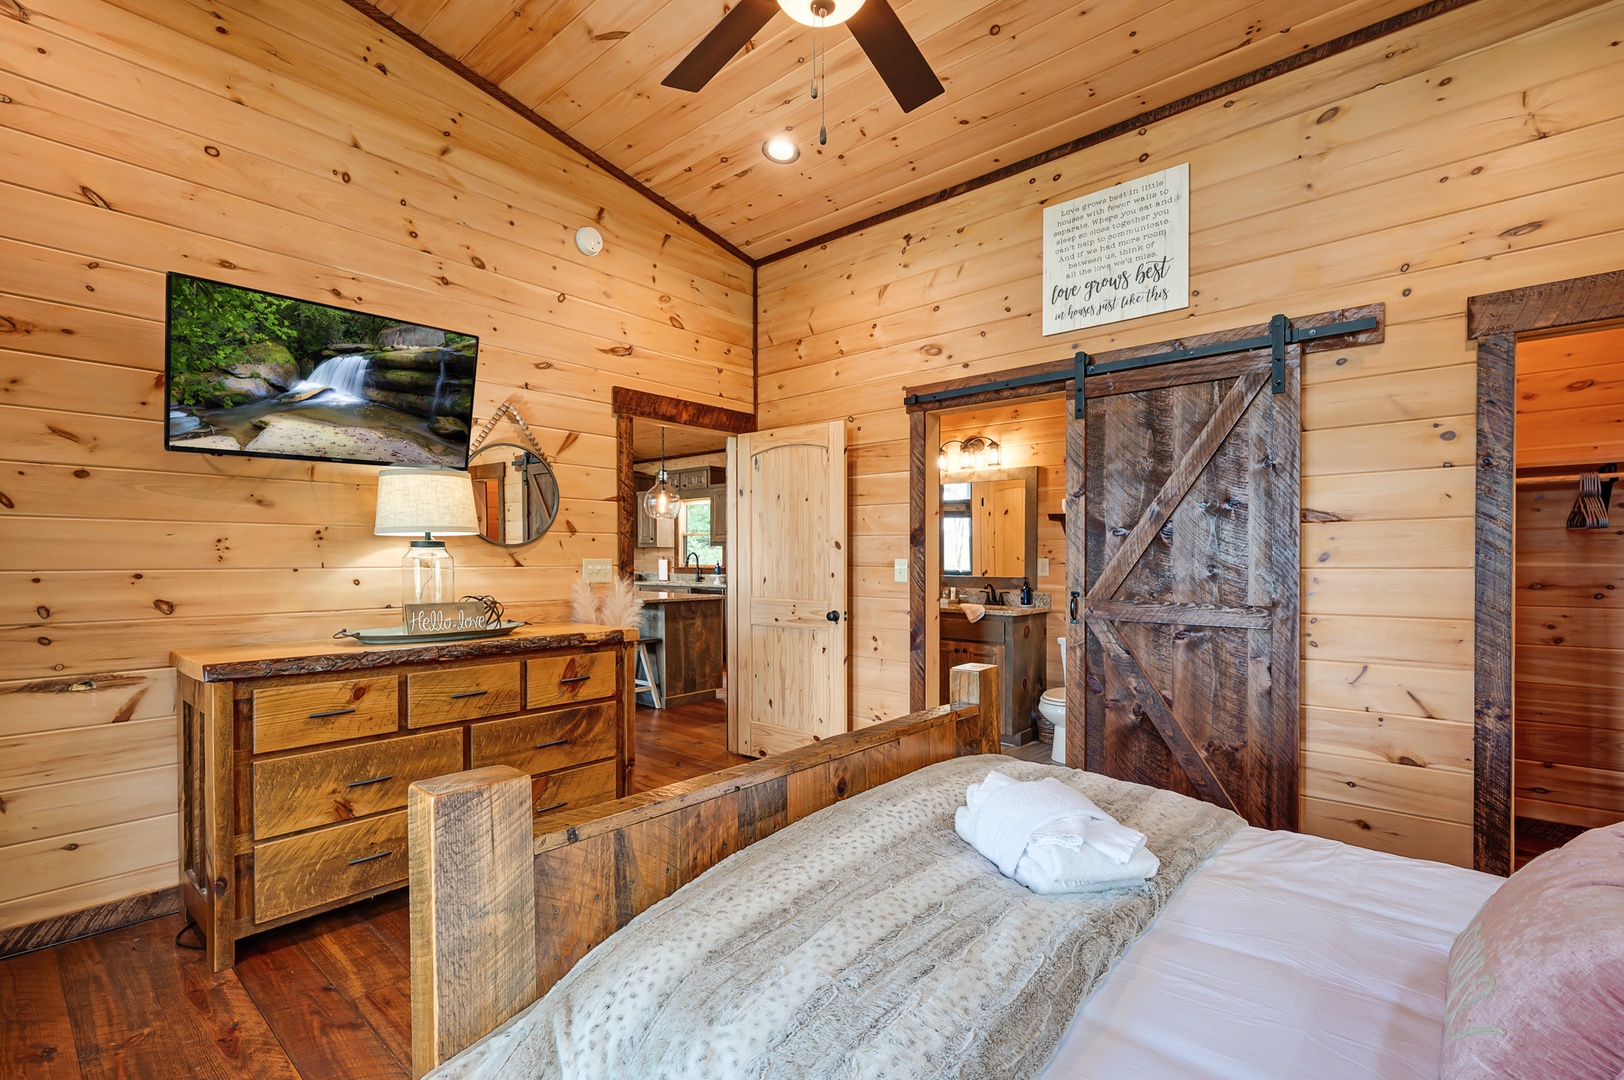 Feather & Fawn Lodge- Entry level guest bedroom with a private bathroom